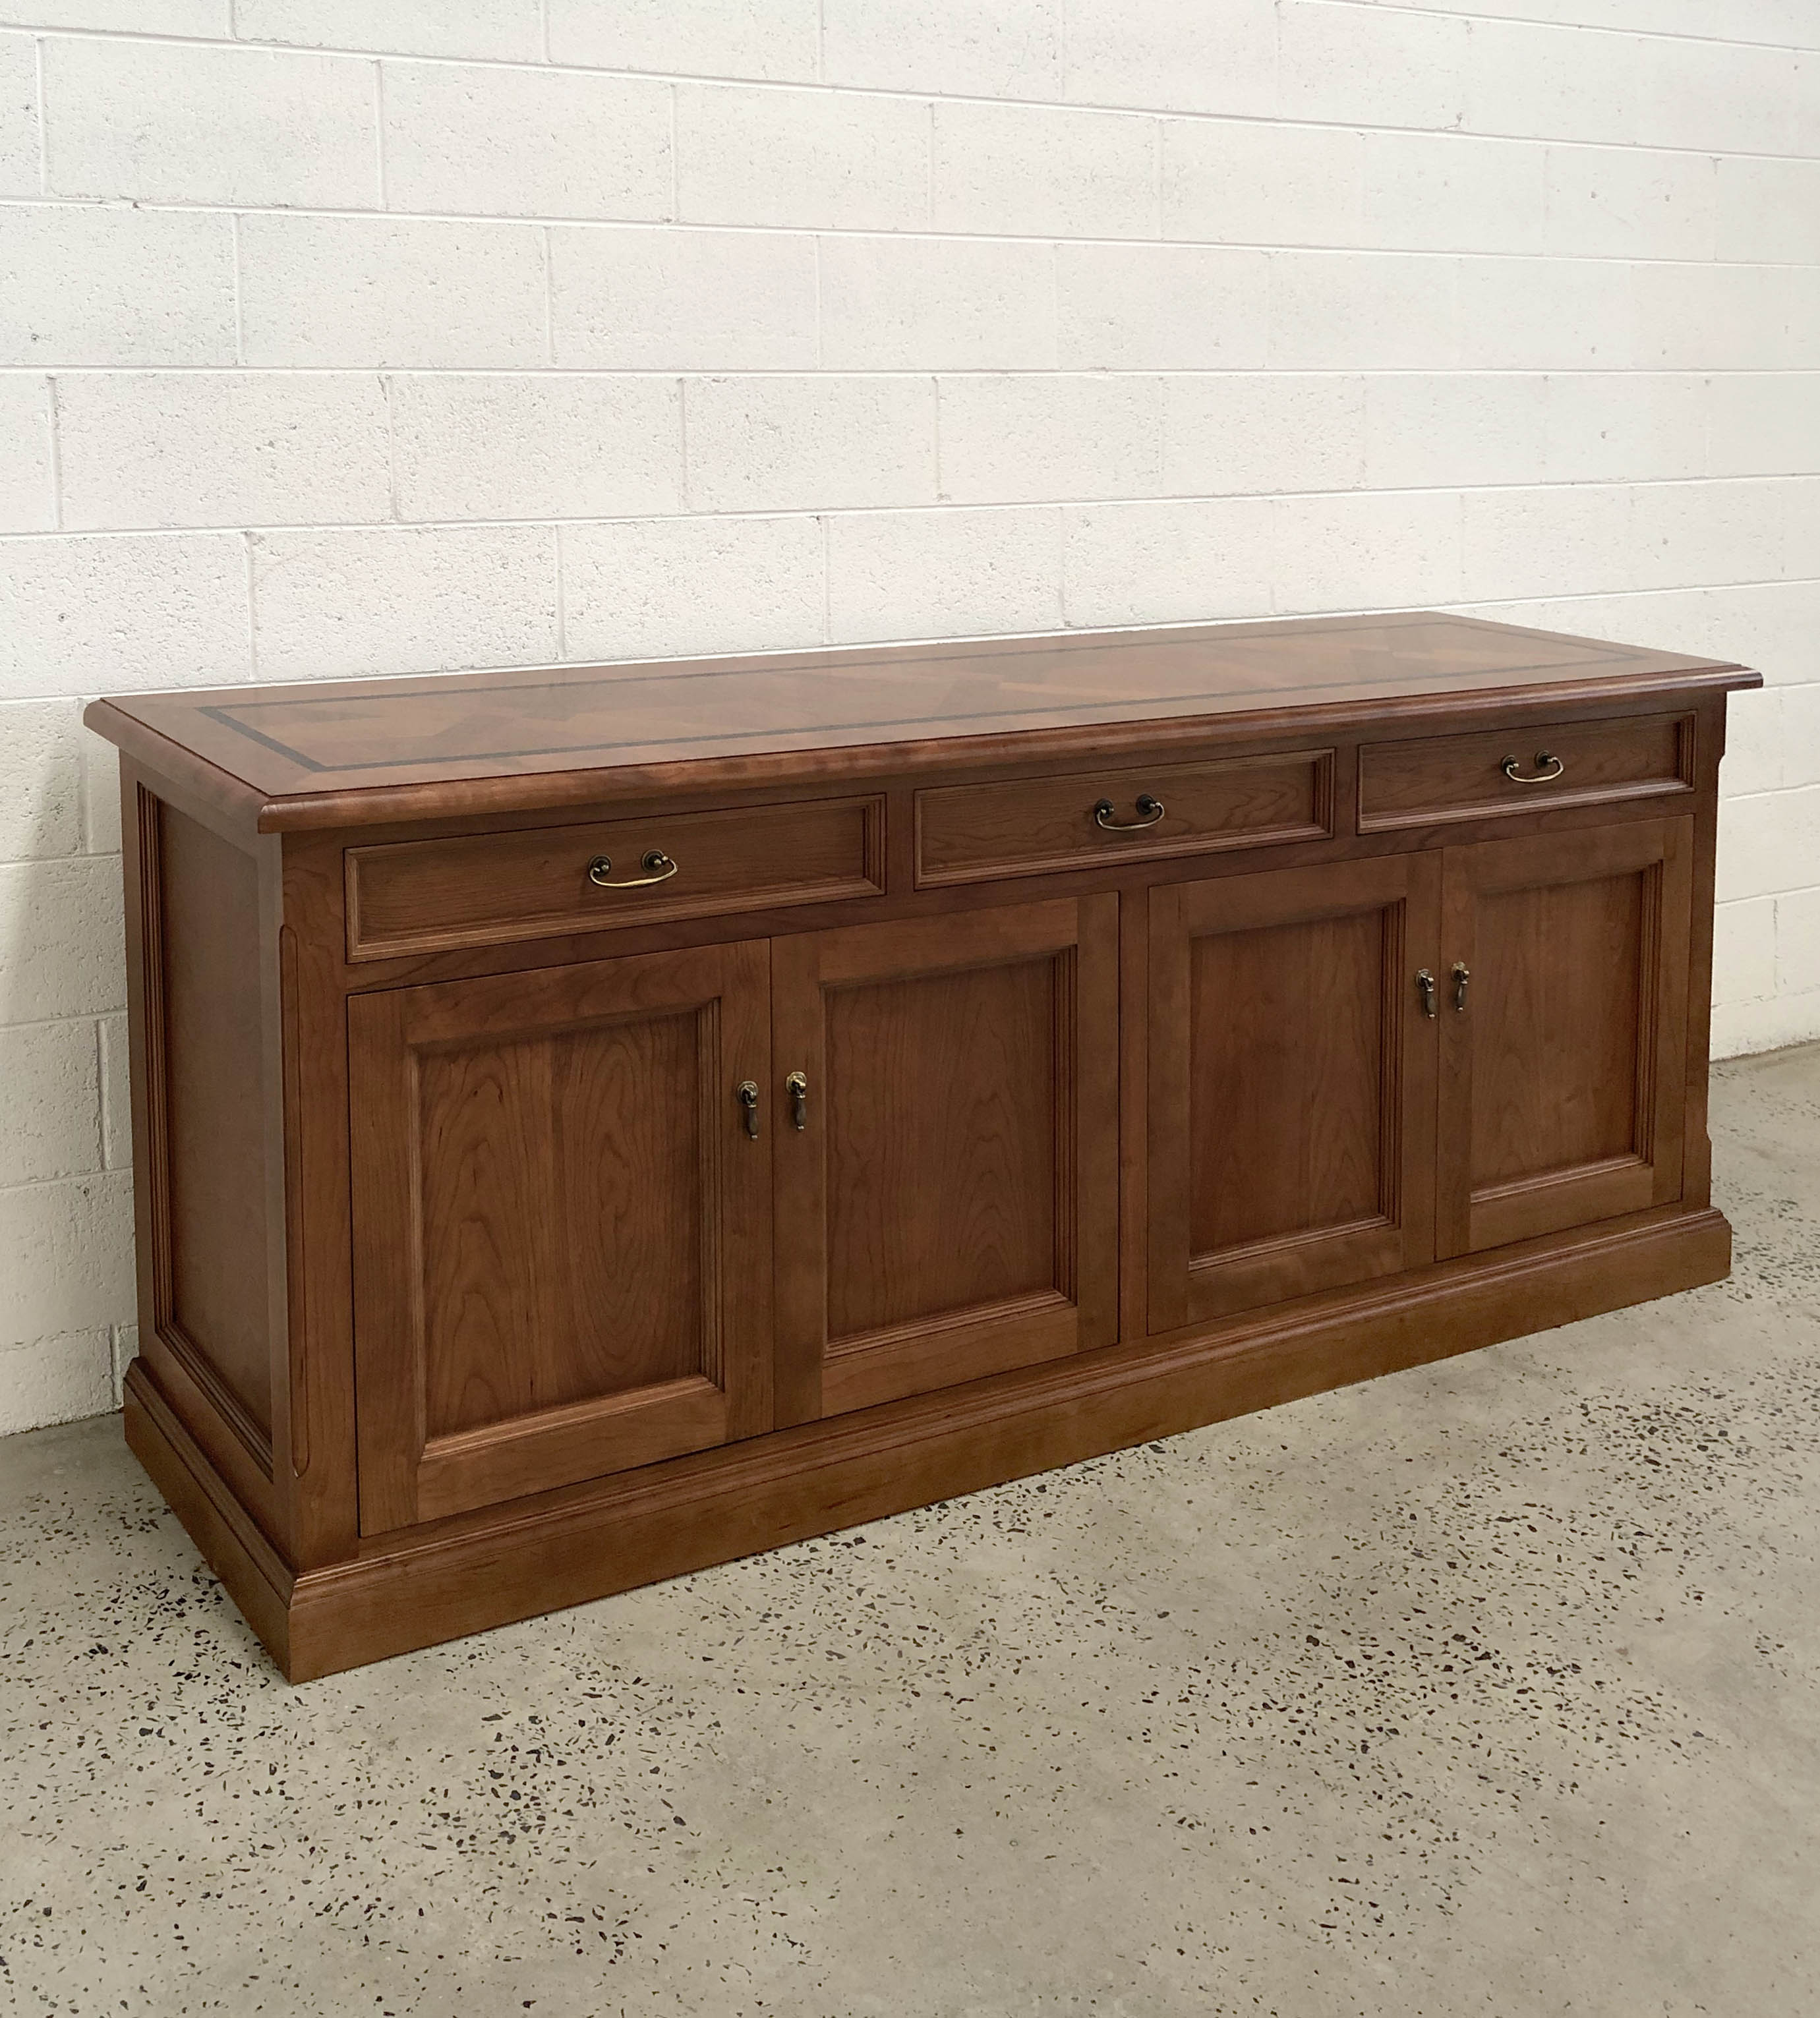 French provincial buffet with parquetry top in american cherry wood